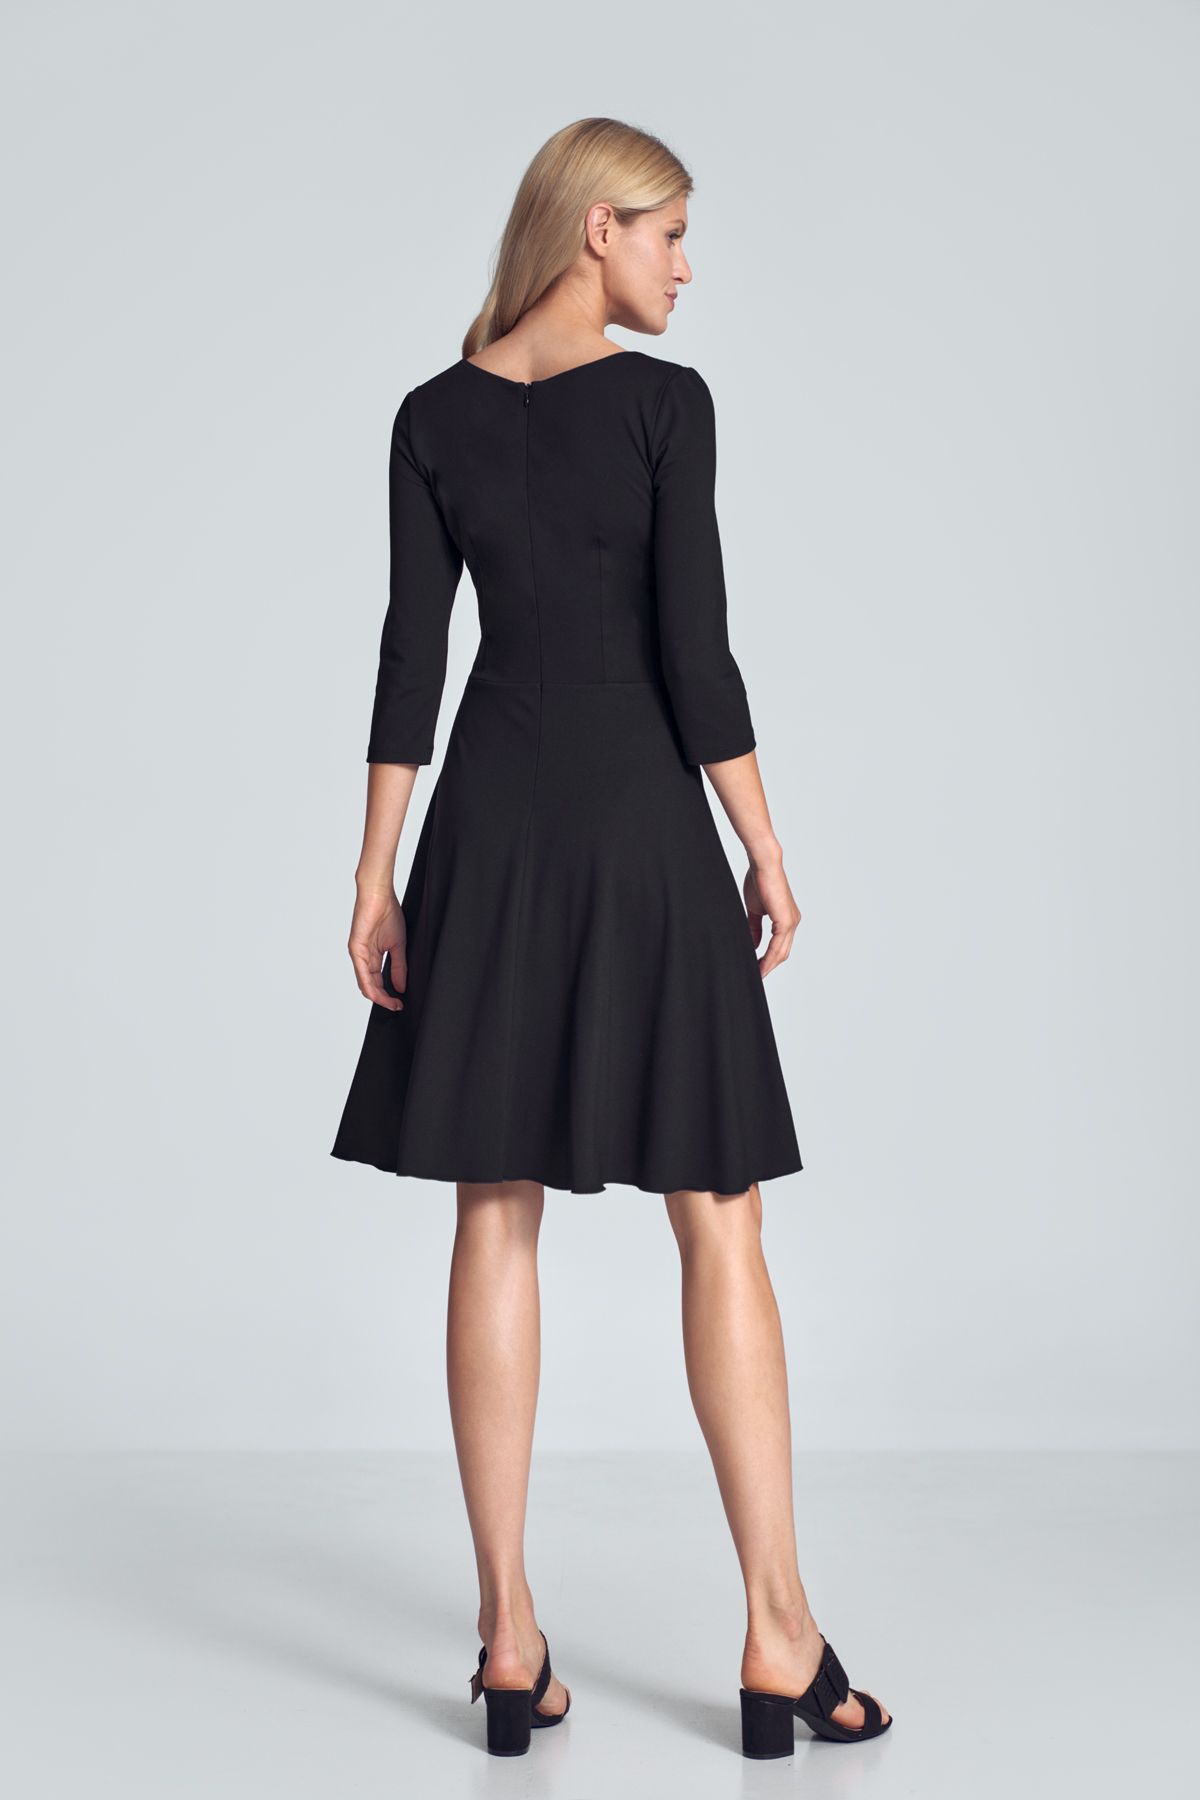 Black cocktail midi dress with a V-neck, ¾ sleeve, pleats at the bust, sewn at the waist, flared hem. Fastened at the back with a covered zipp.